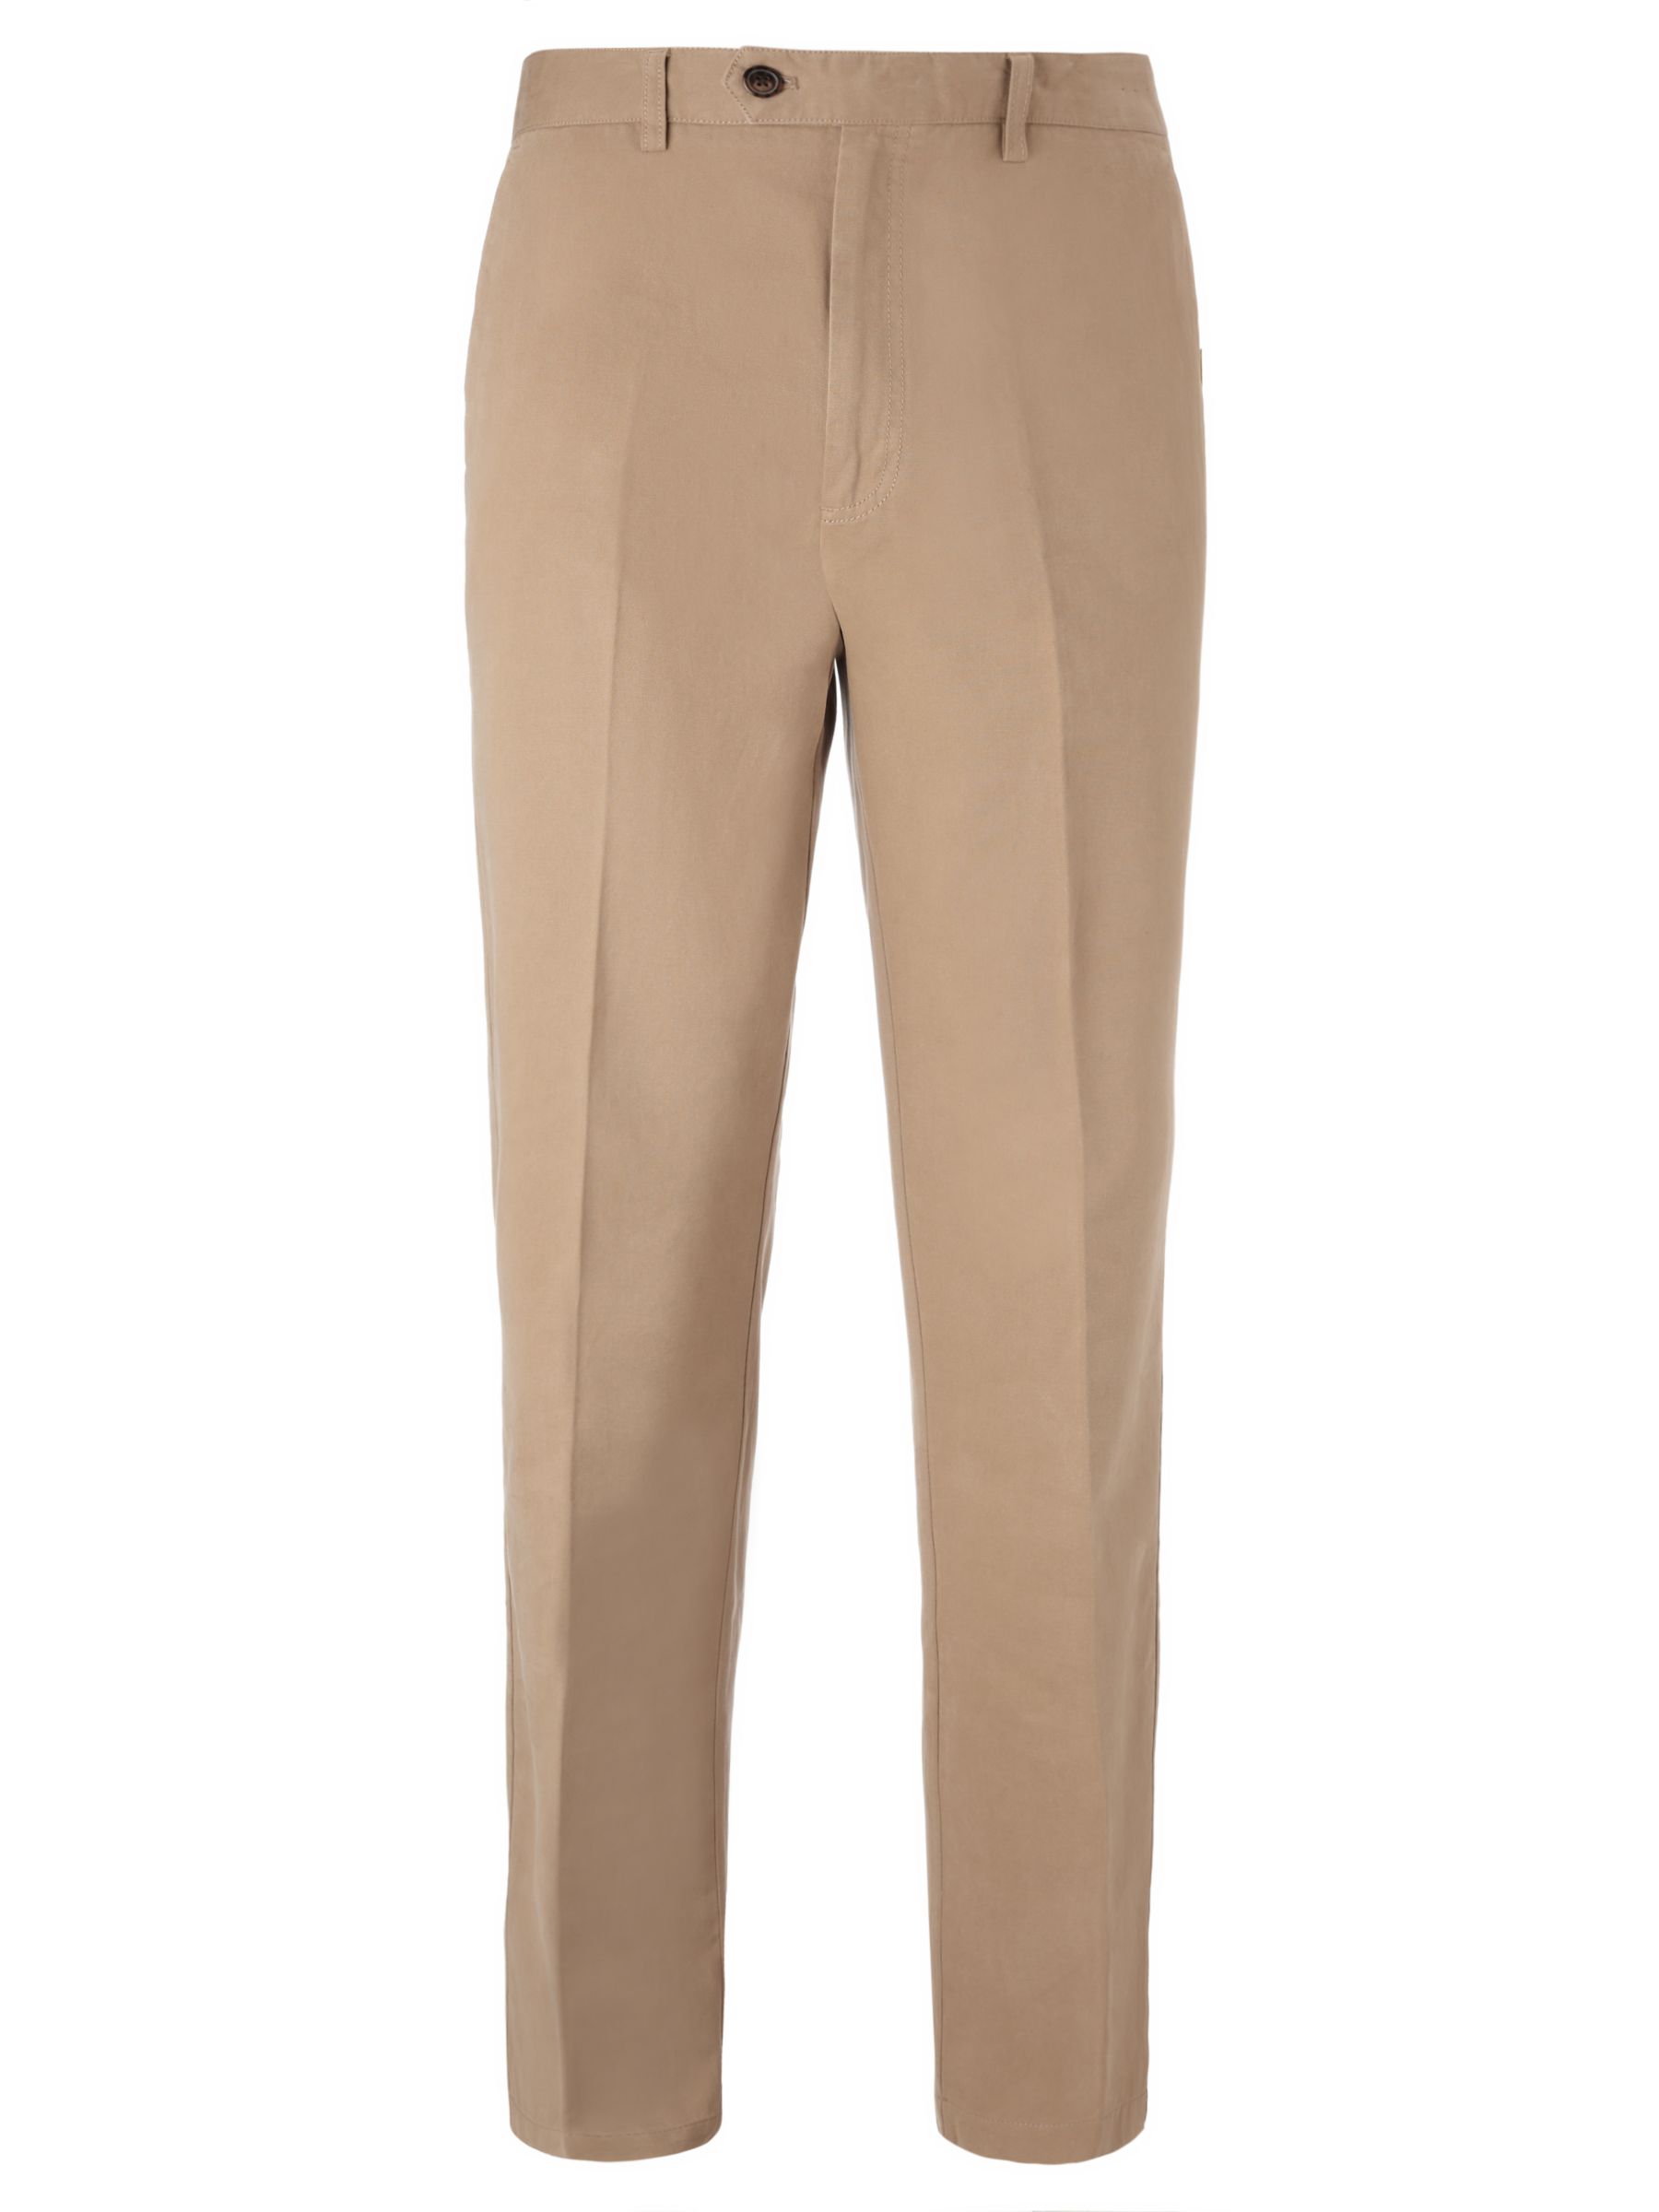 John Lewis & Partners Wrinkle Free Flat Front Trousers, Stone